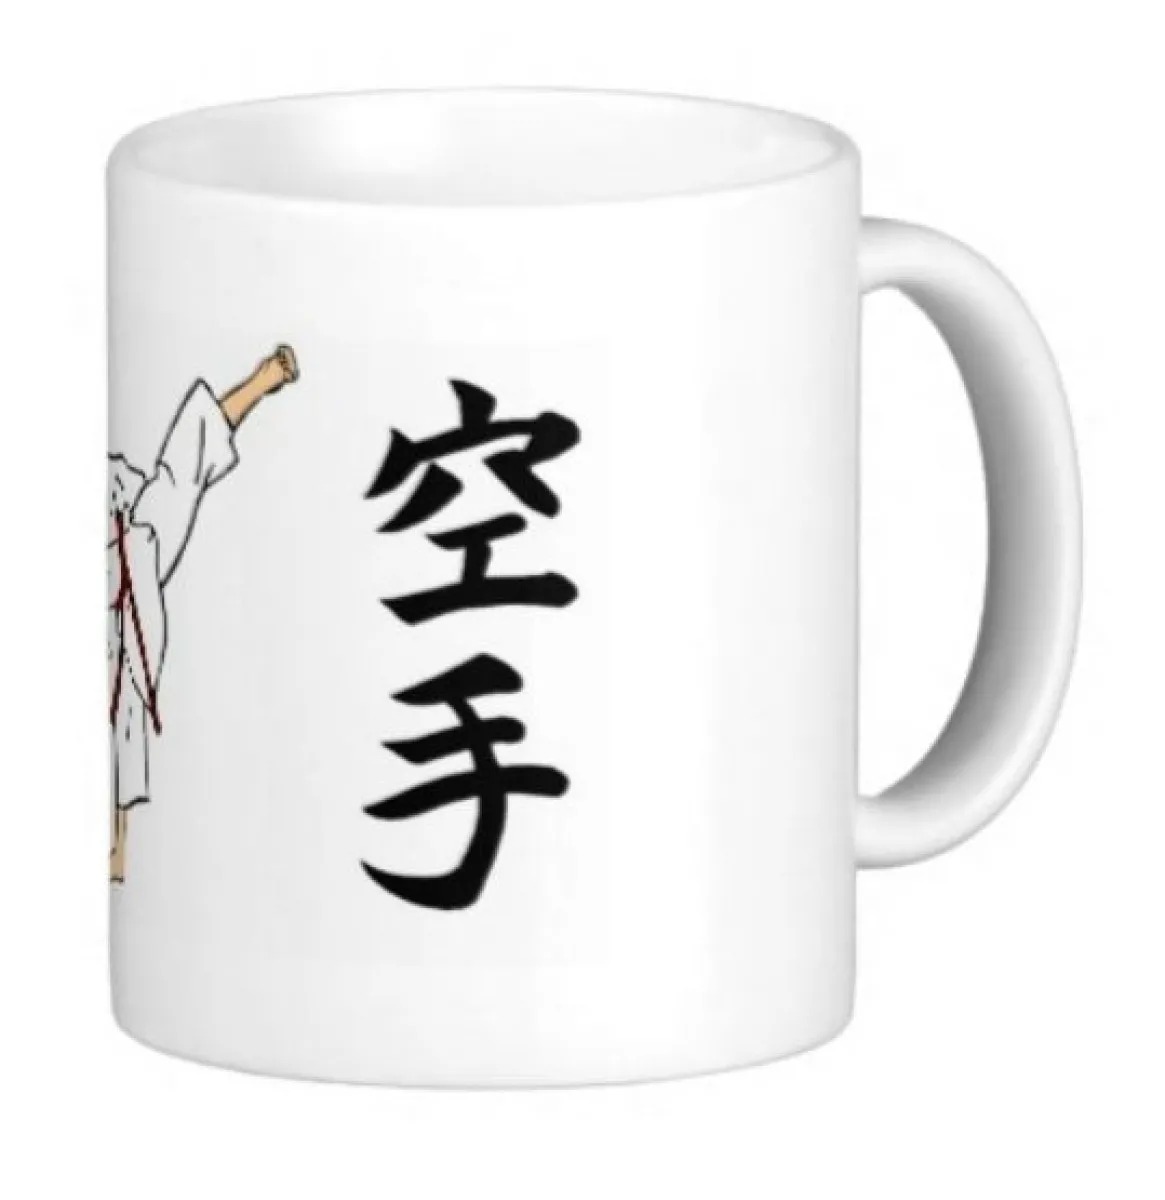 cup white printed with karate figure